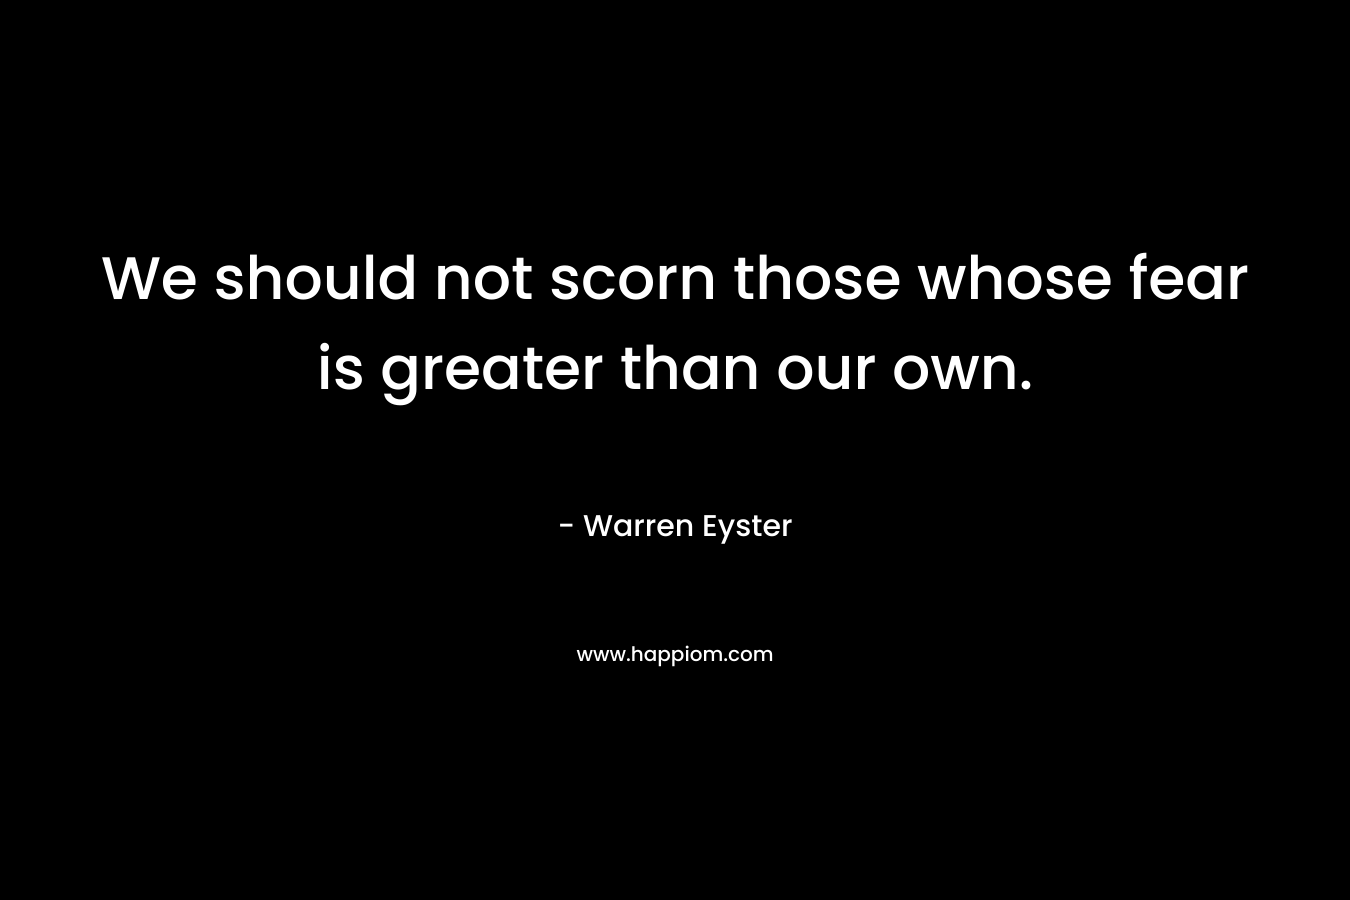 We should not scorn those whose fear is greater than our own. – Warren Eyster